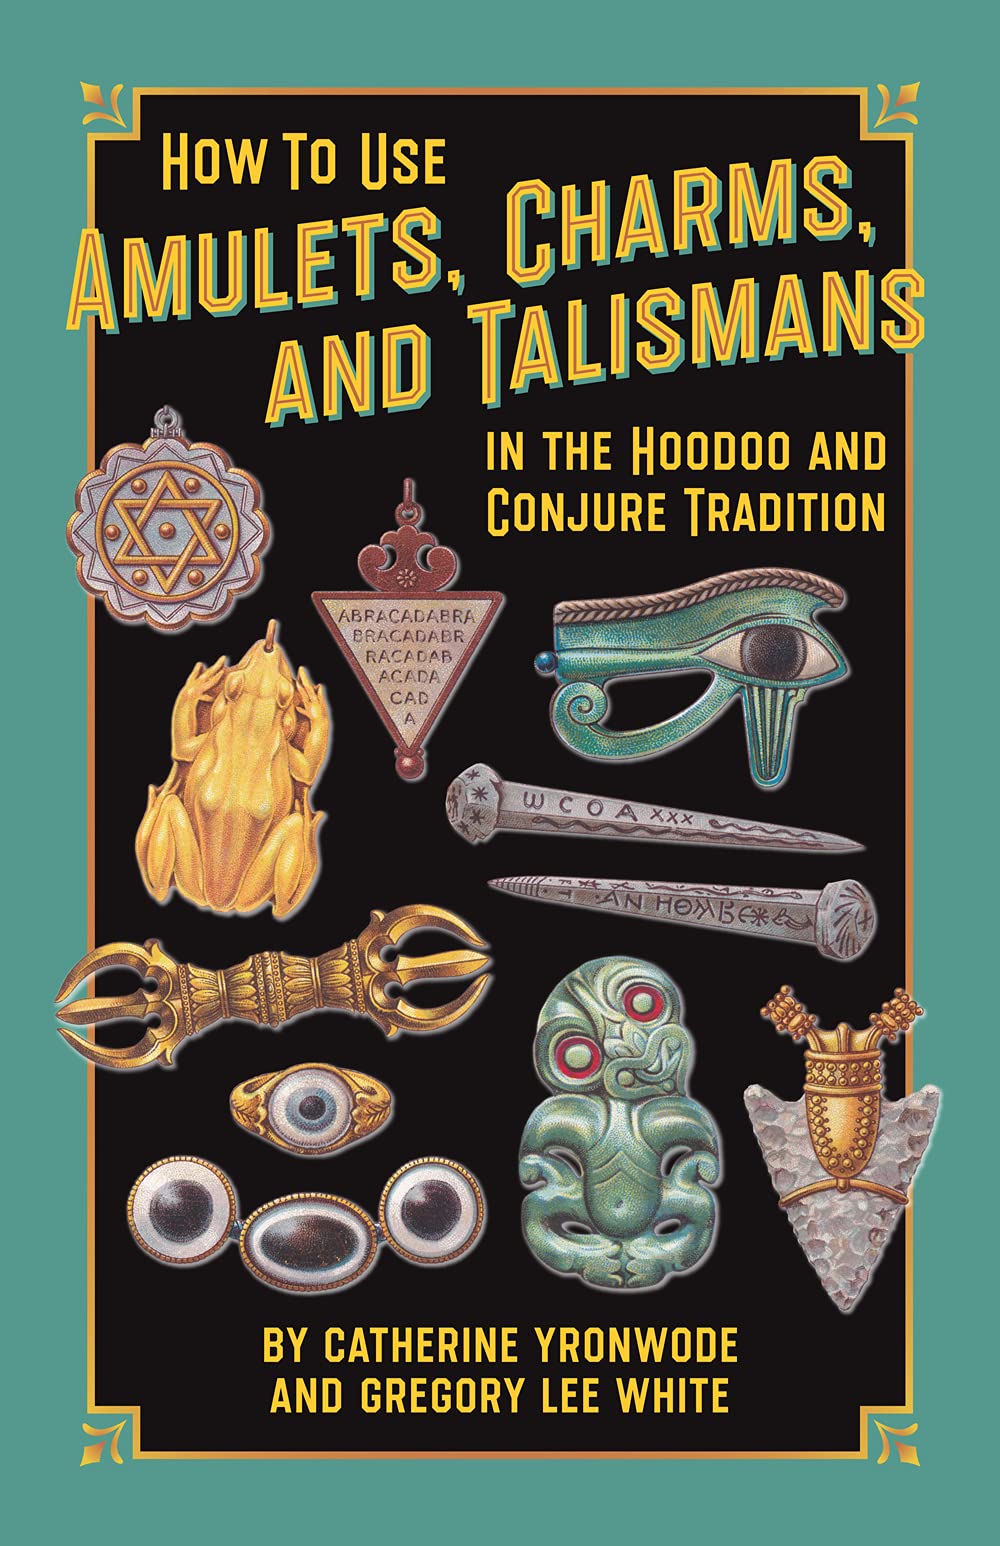 How to Use Amulets, Charms, and Talismans in the Hoodoo and Conjure Tradition: Physical Magic for Protection, Health, Money, Love, and Long Life